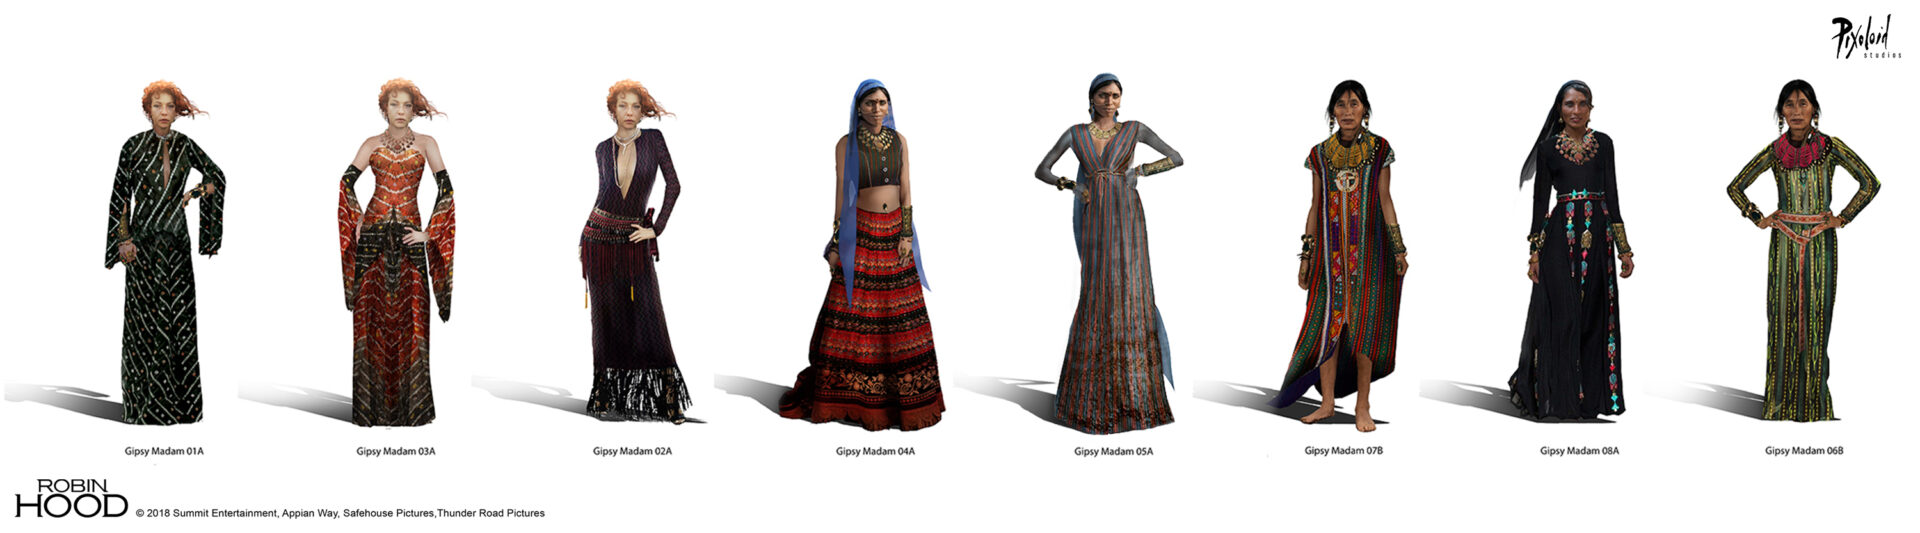 Gypsy Madam costume concepts for Robin Hood movie